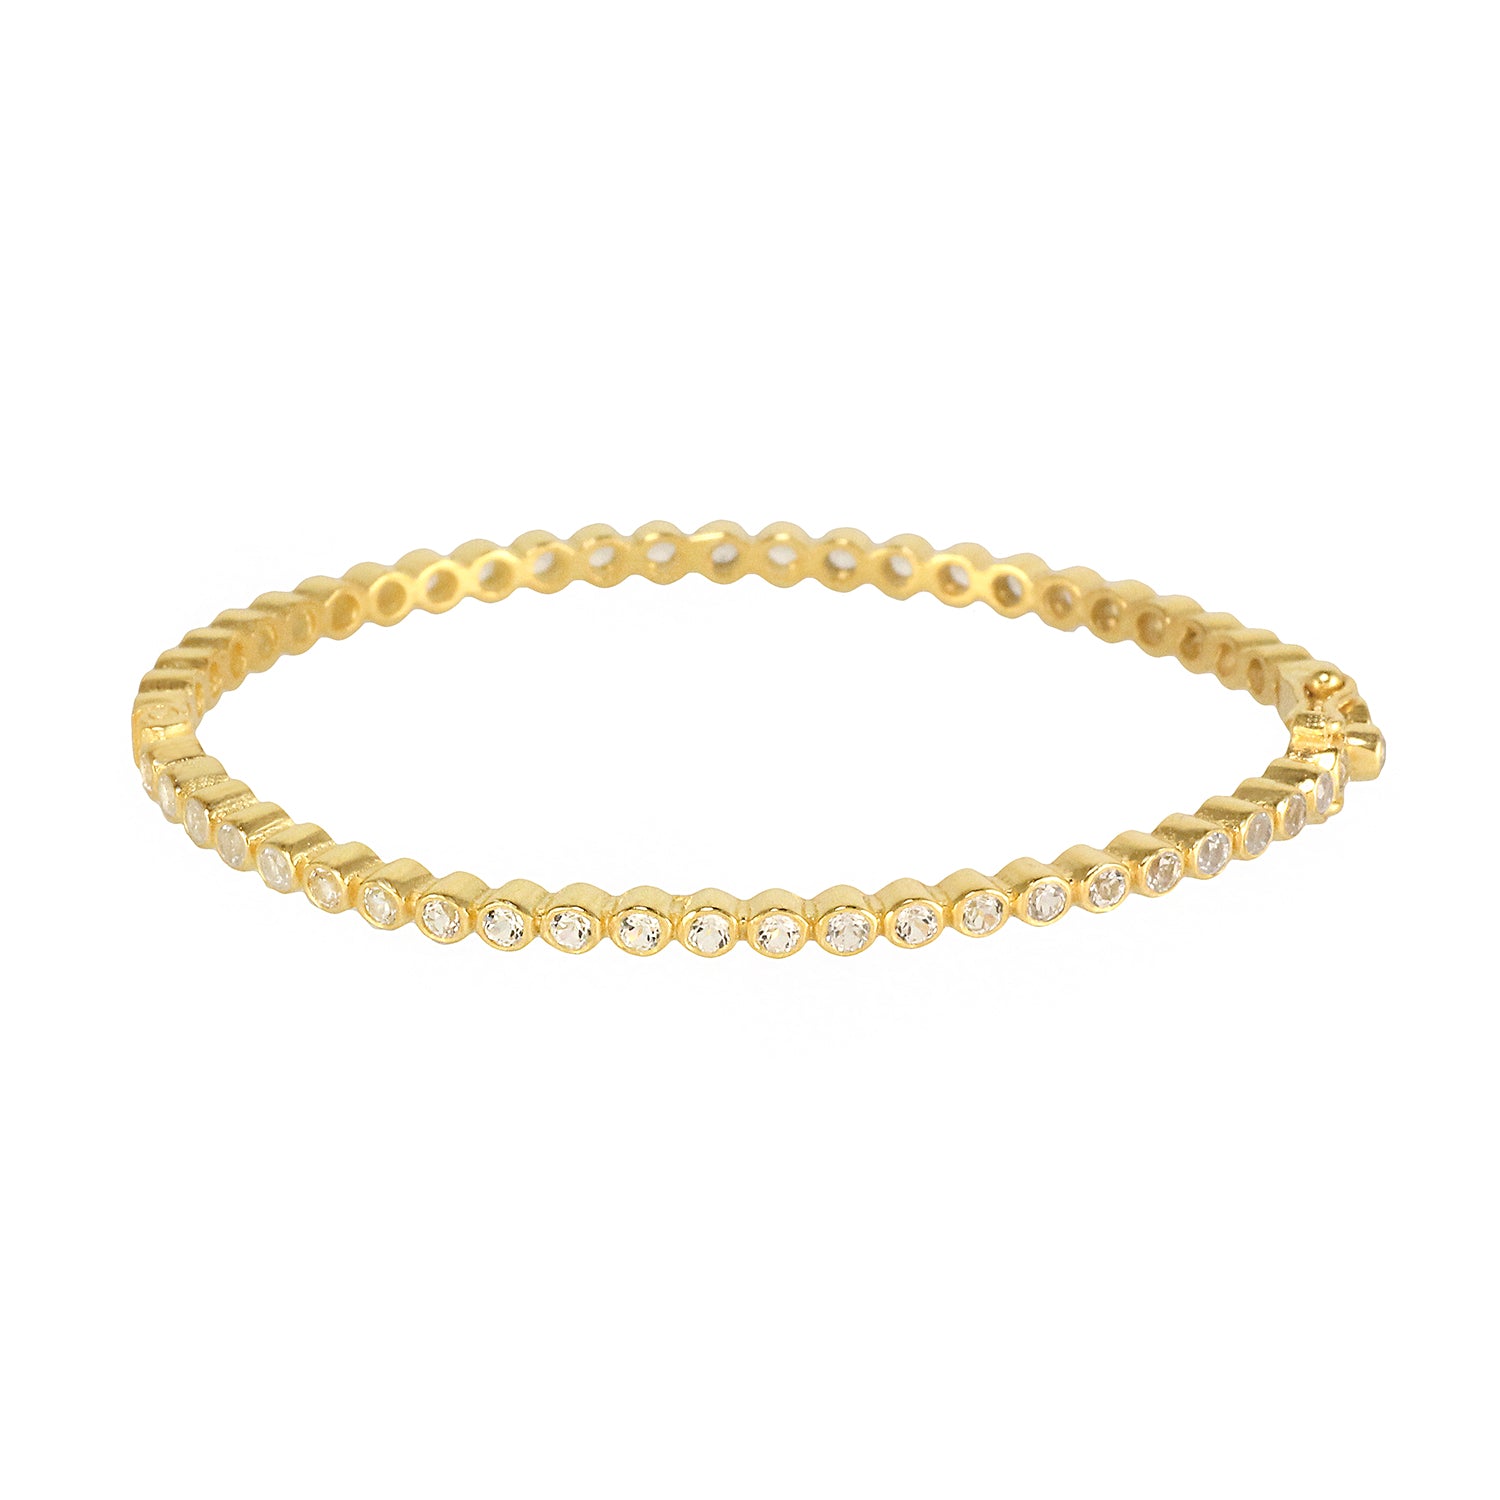 Silver gold plated thin bracelet bangle with white topaz stone, made in India